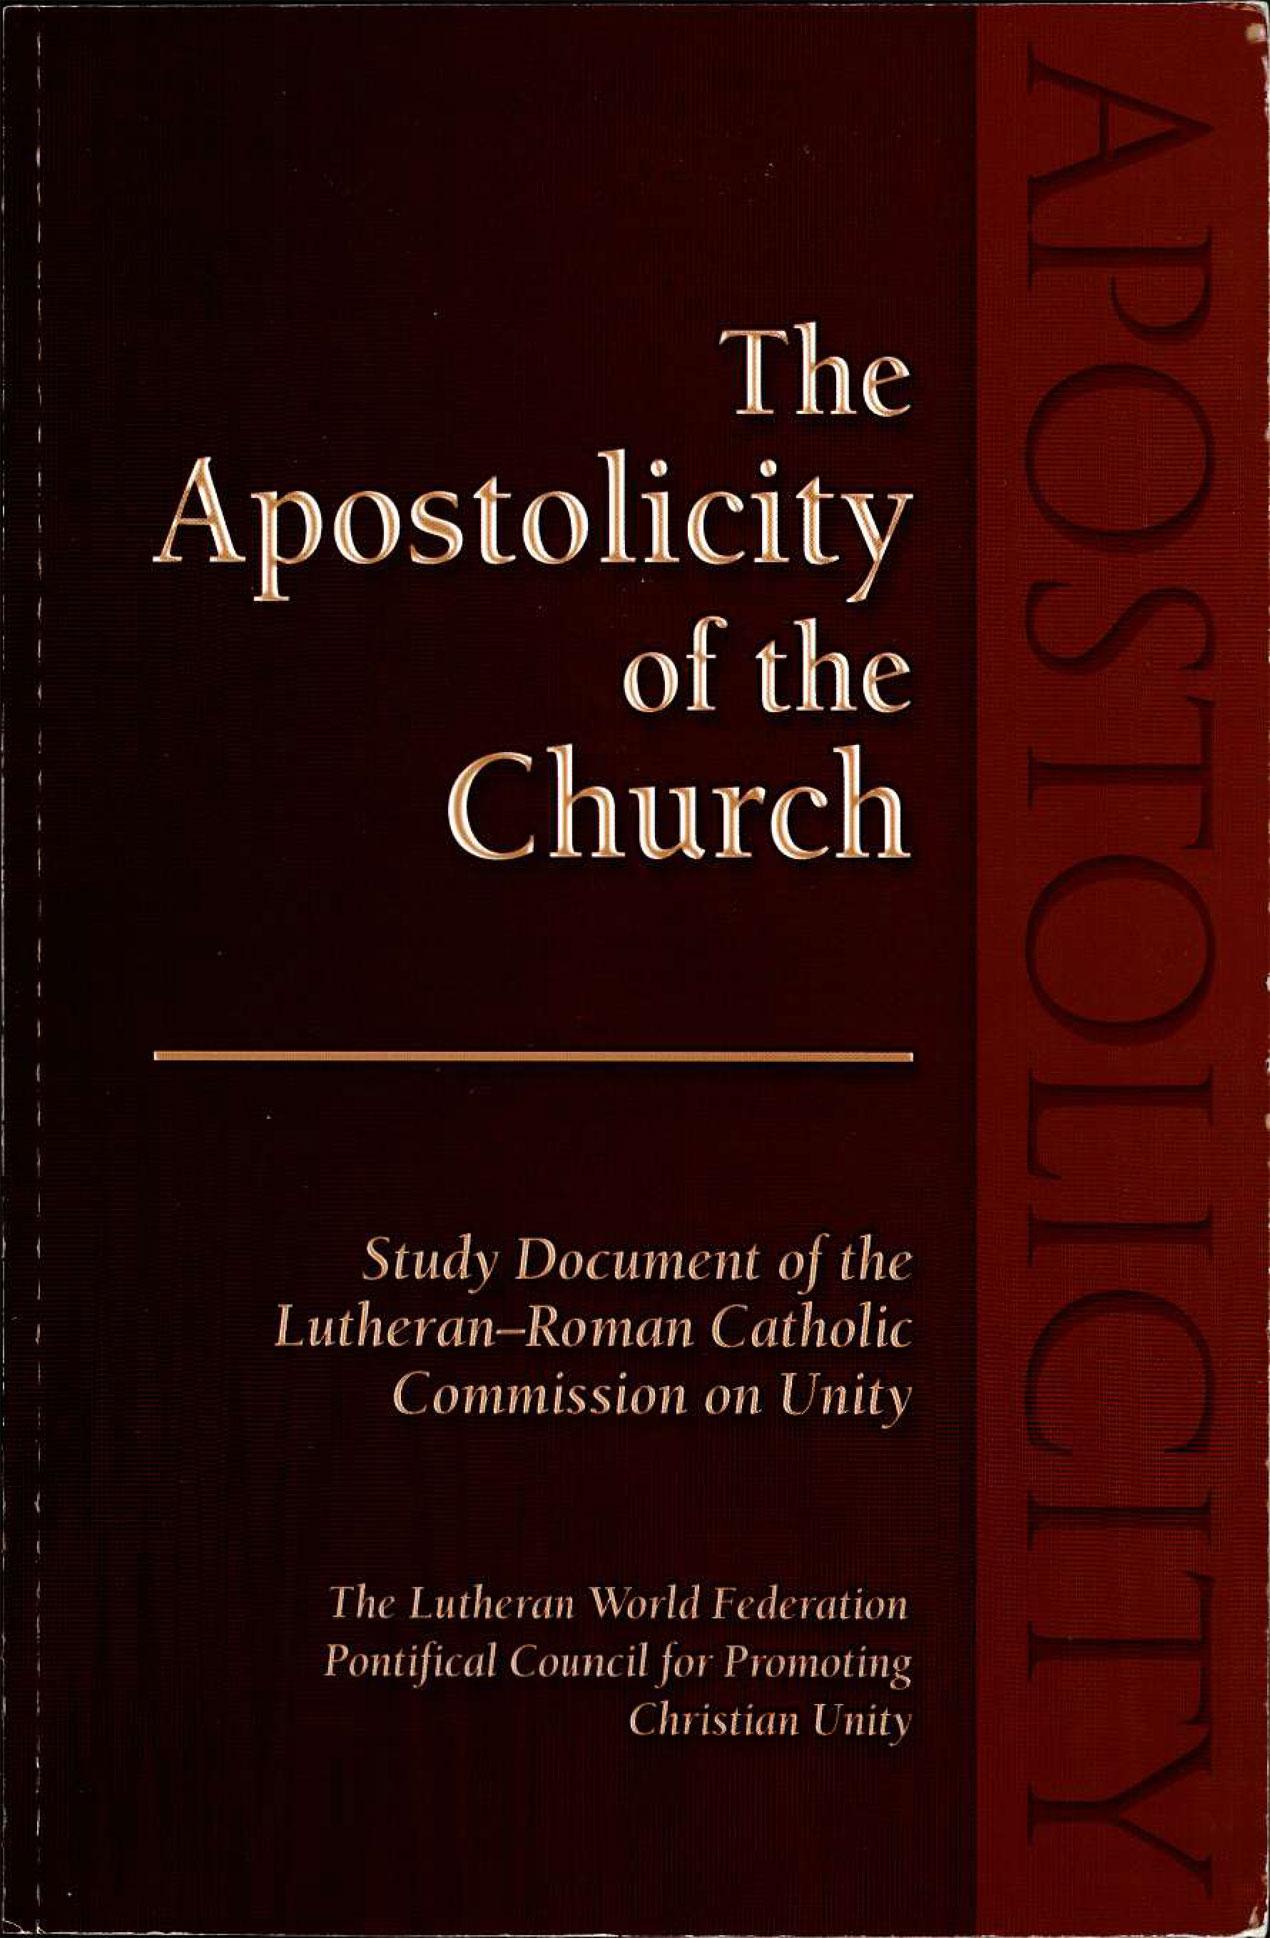 The Apostolicity of the Church